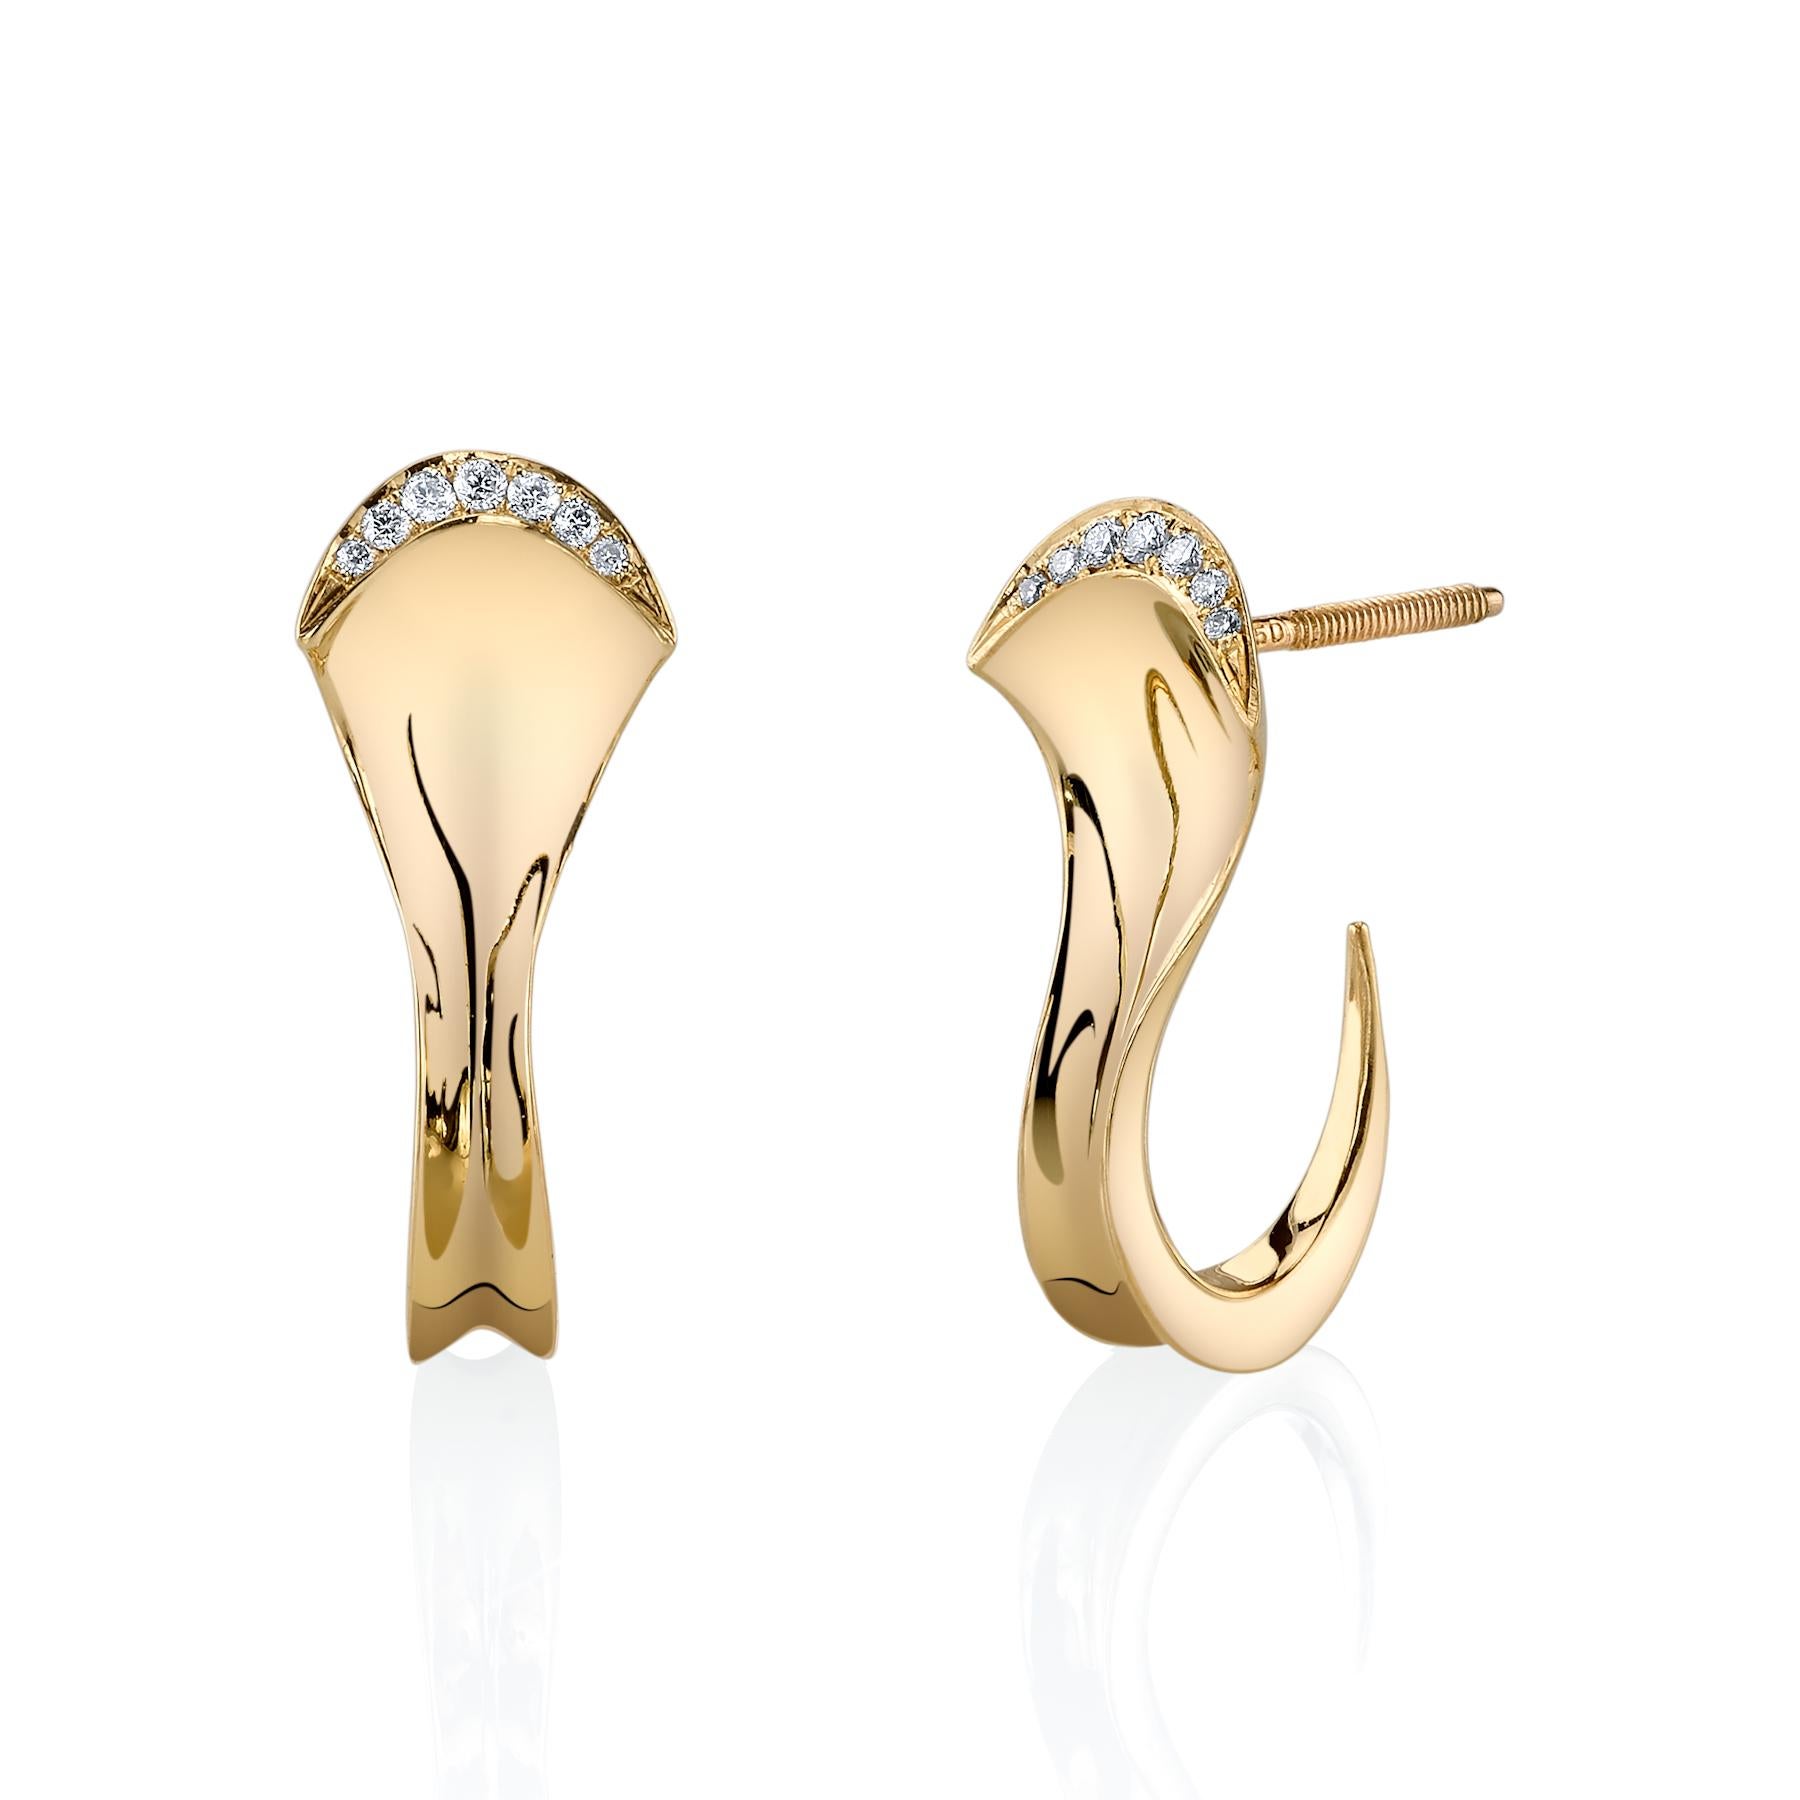 Sculptural Contemporary, Couture 18K Gold Earrings with Natural White Diamonds For Sale 4